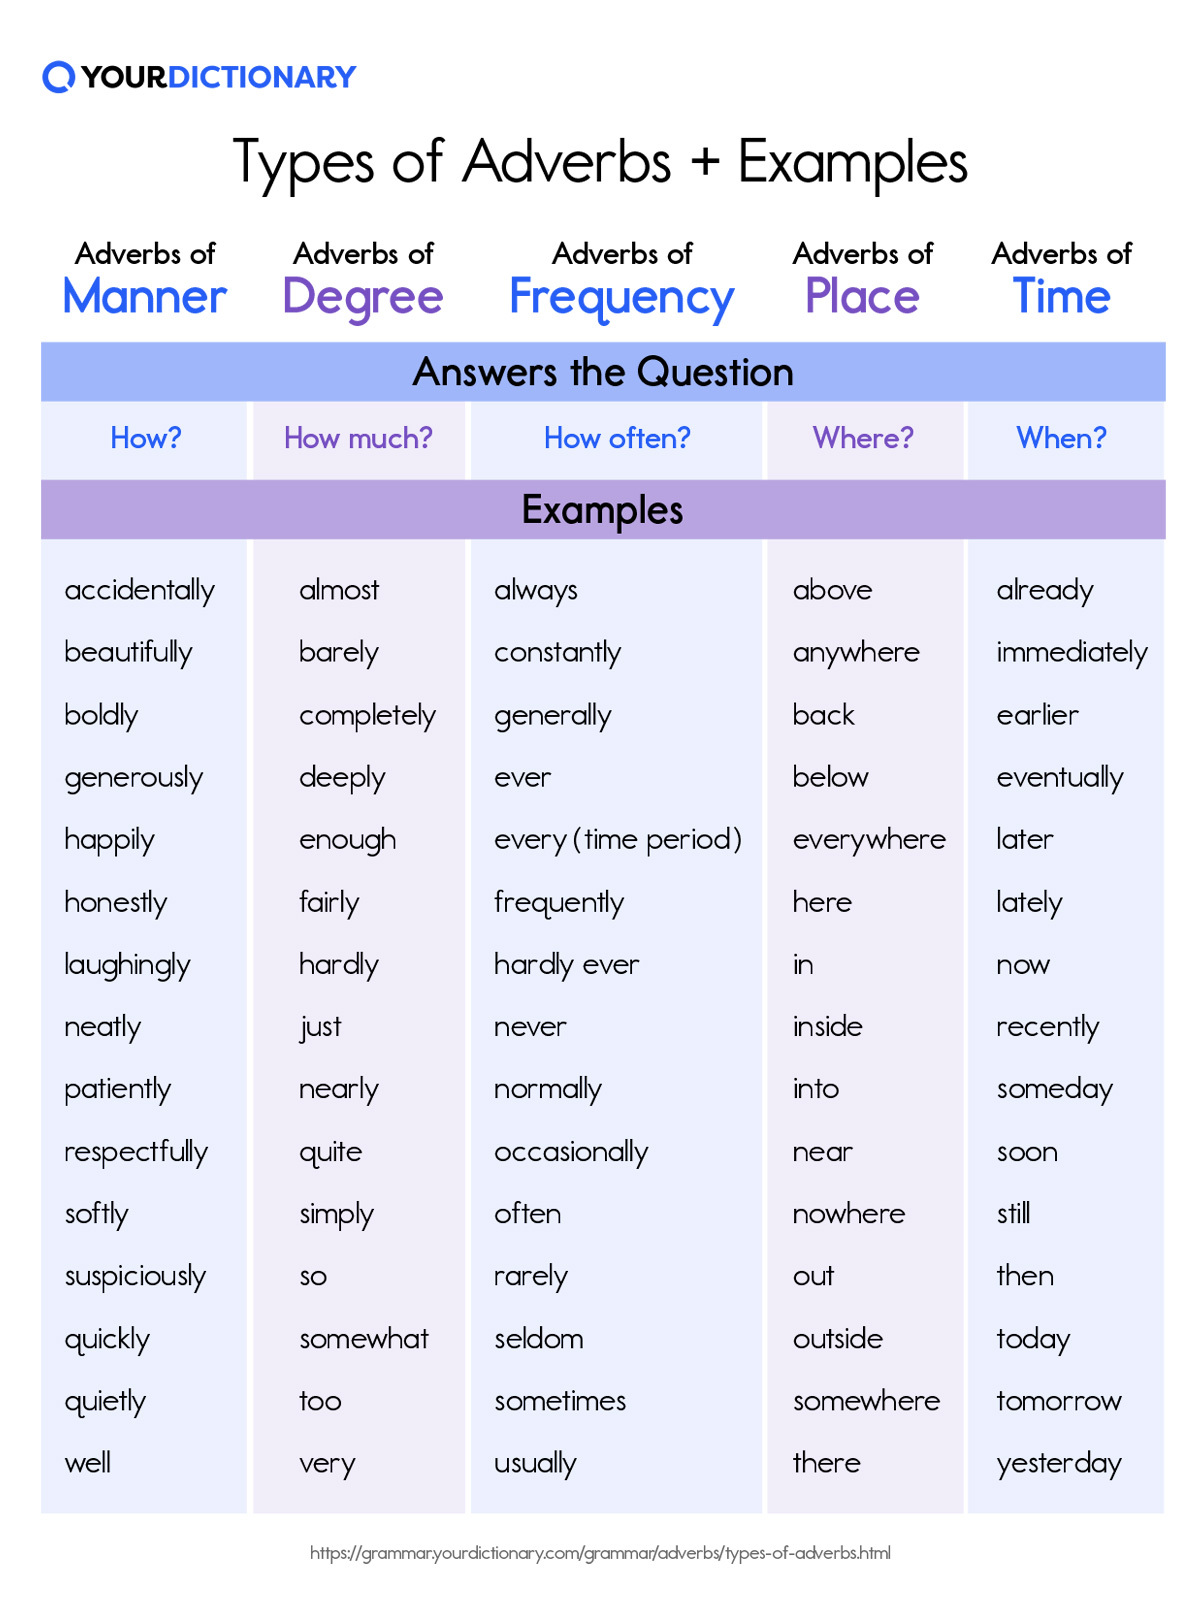 Chart With Each Type of Adverb and Examples